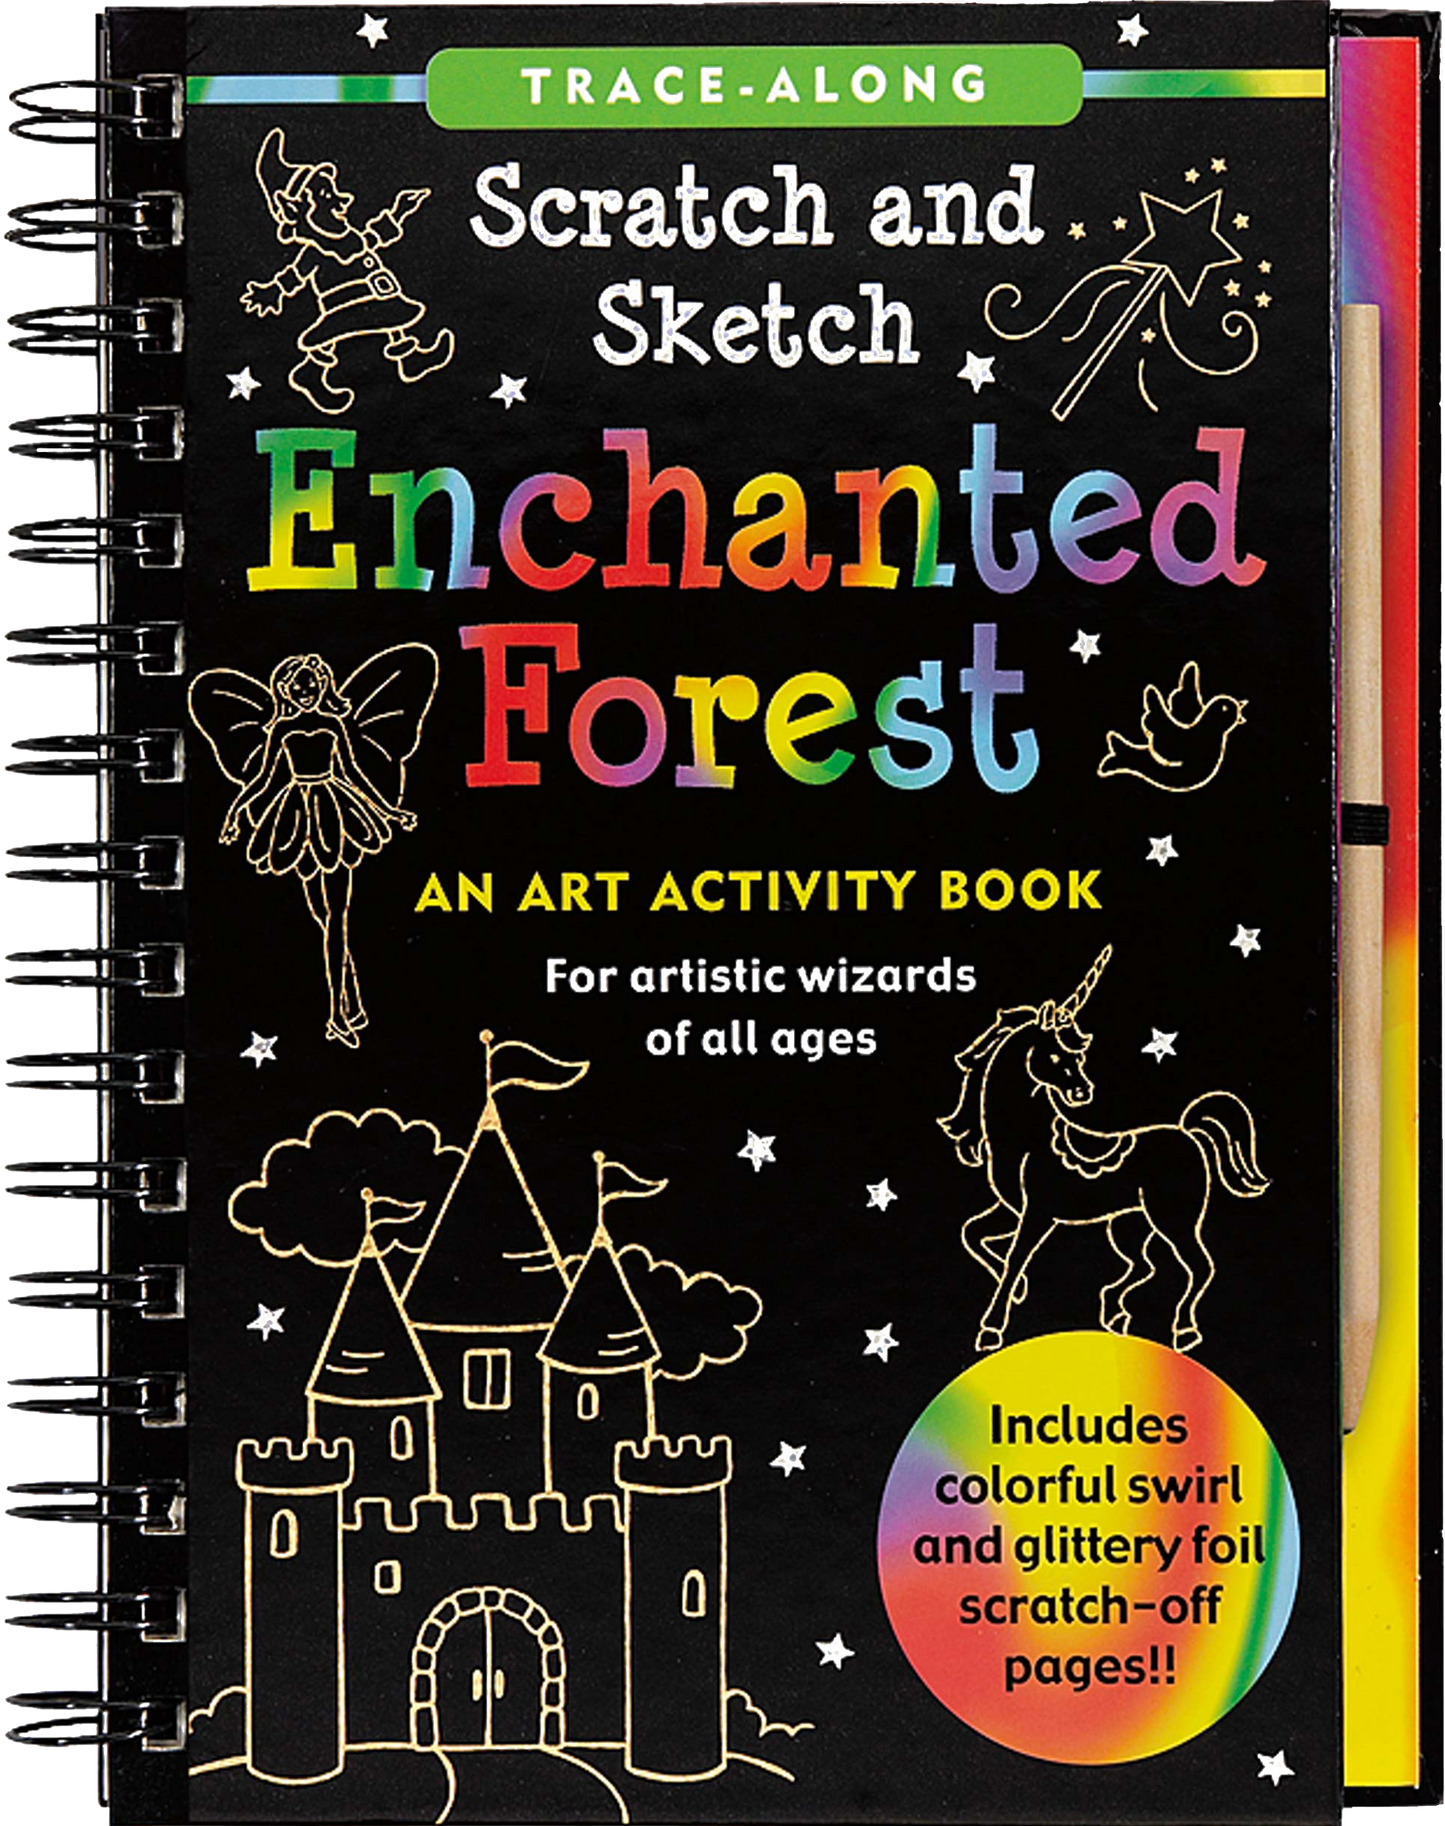 Enchanted Forest Scratch & Sketch™